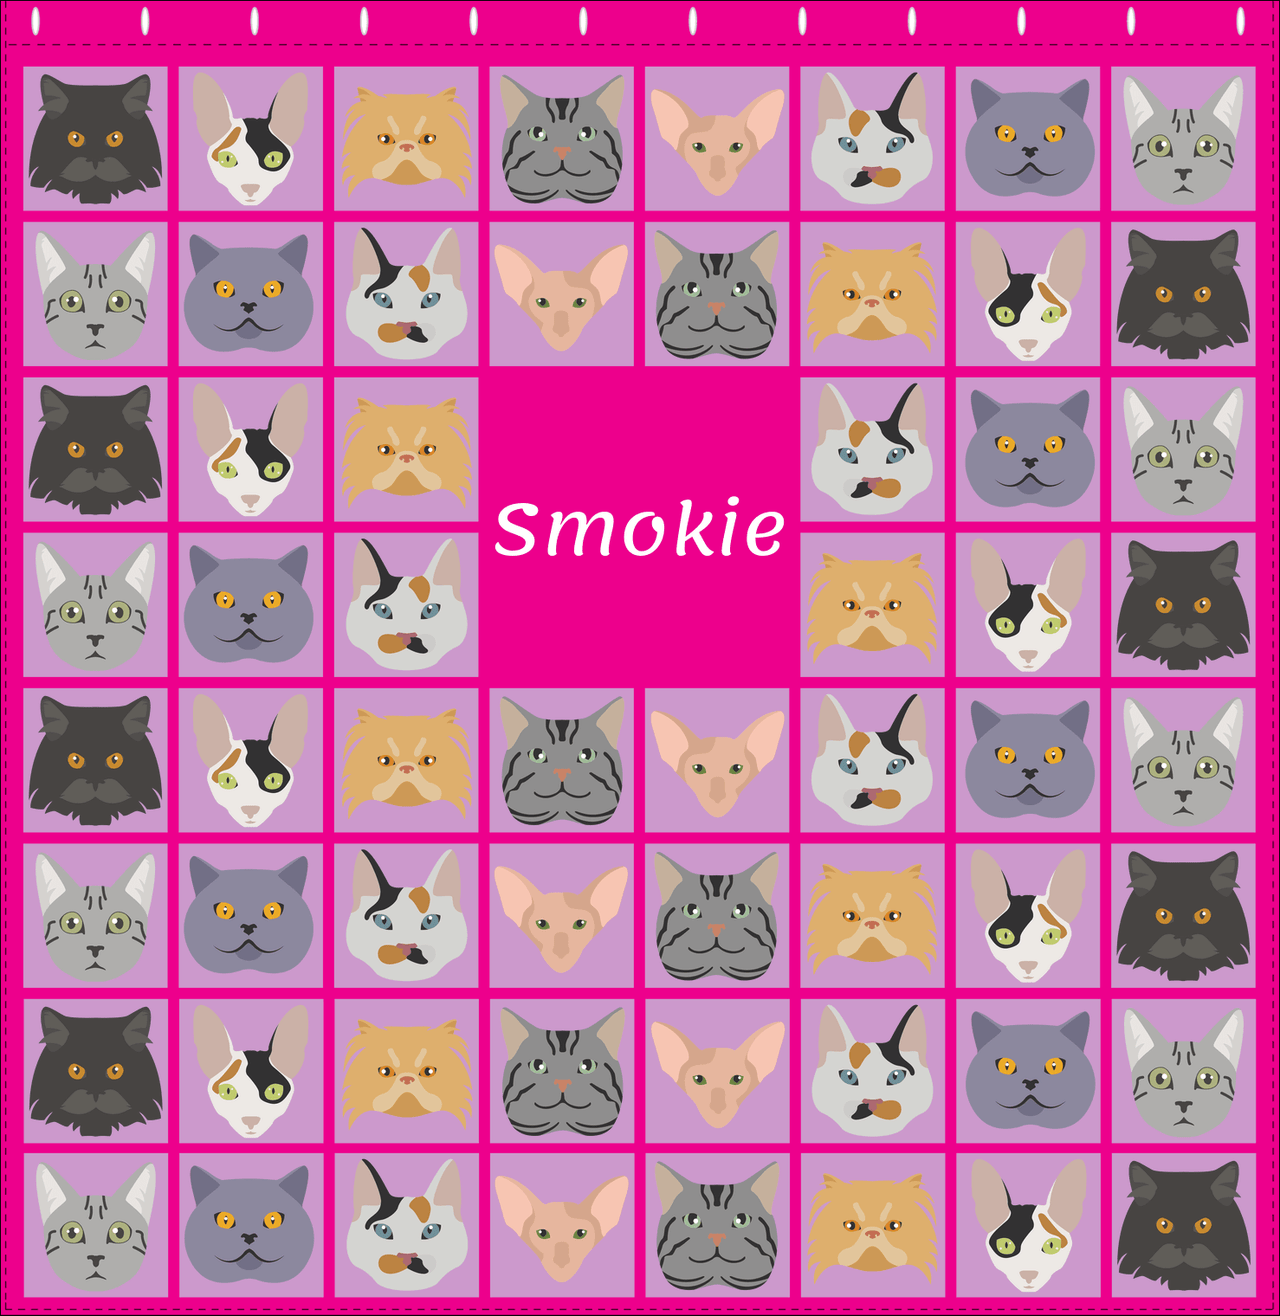 Personalized Cats Shower Curtain V - Cat Squares - Pink Background - Decorate View